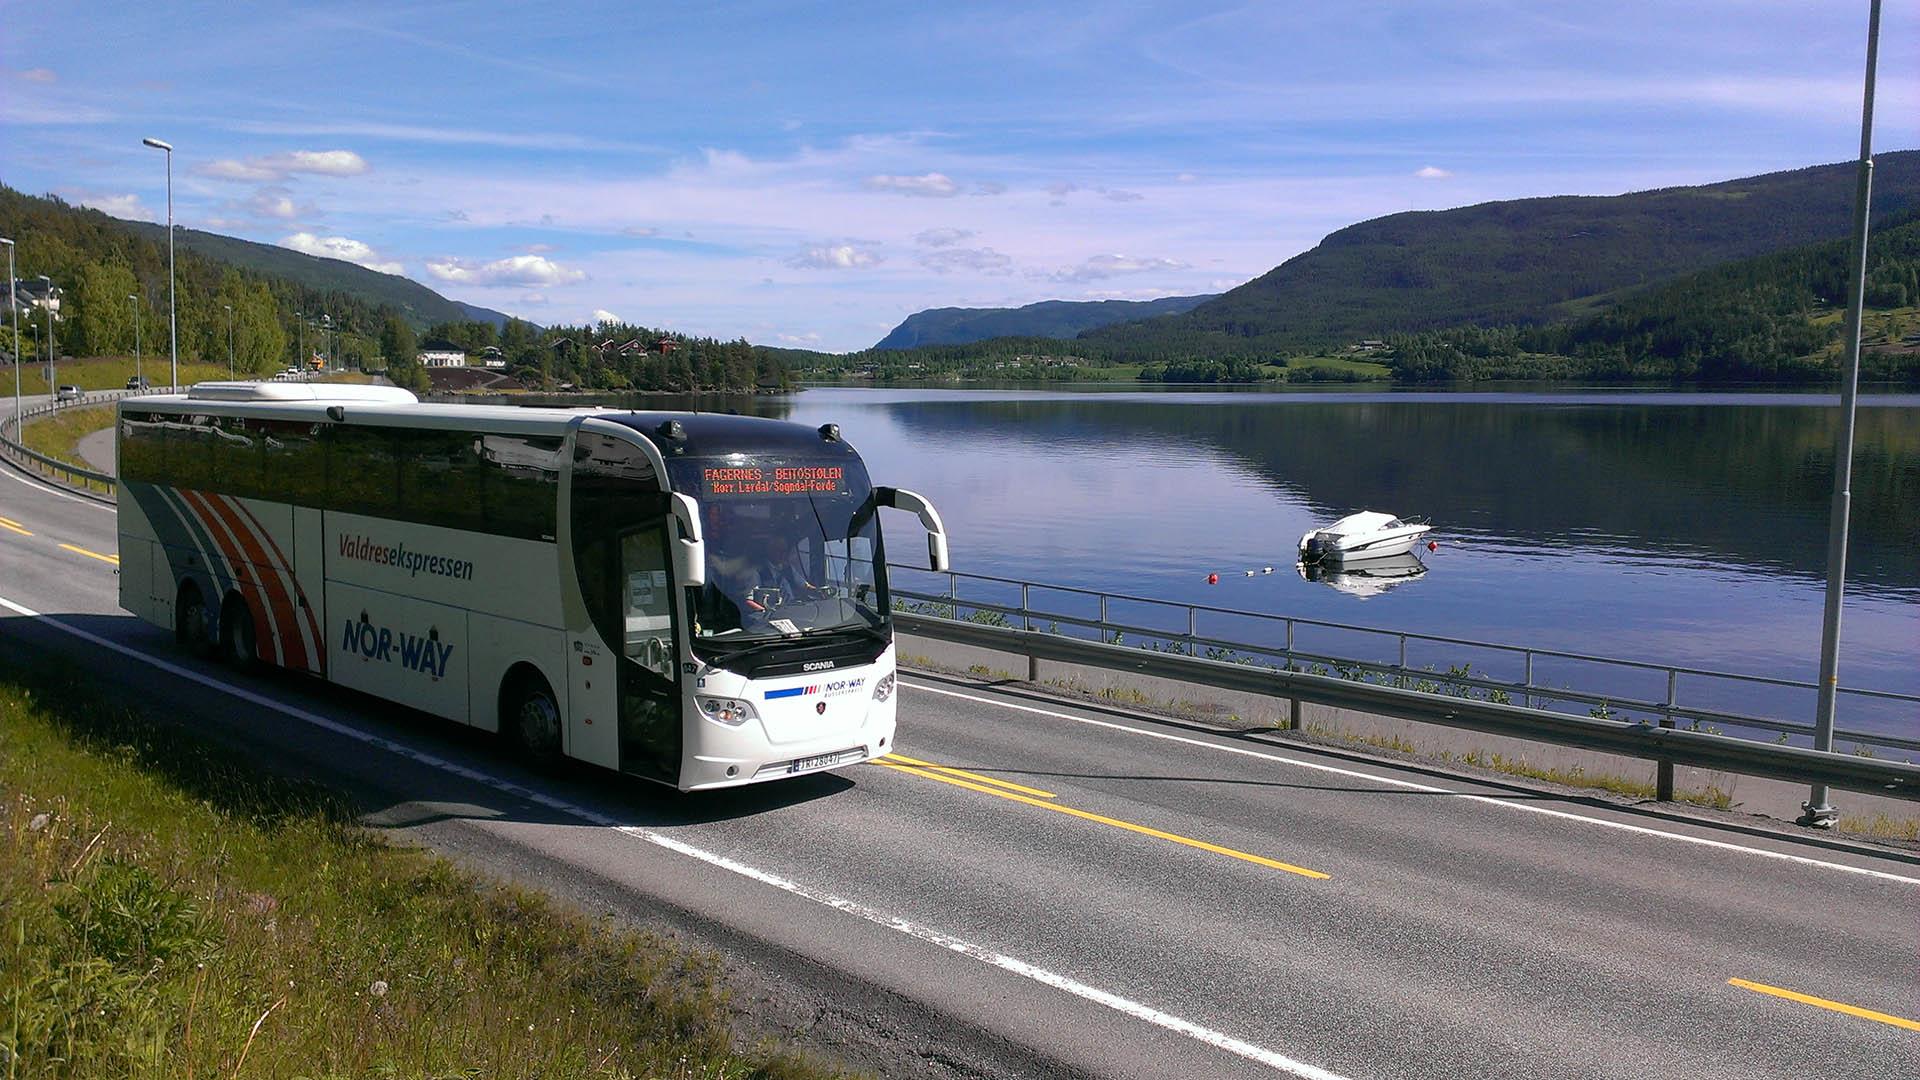 A tour coach on a good road along a lake a sunny summer's day